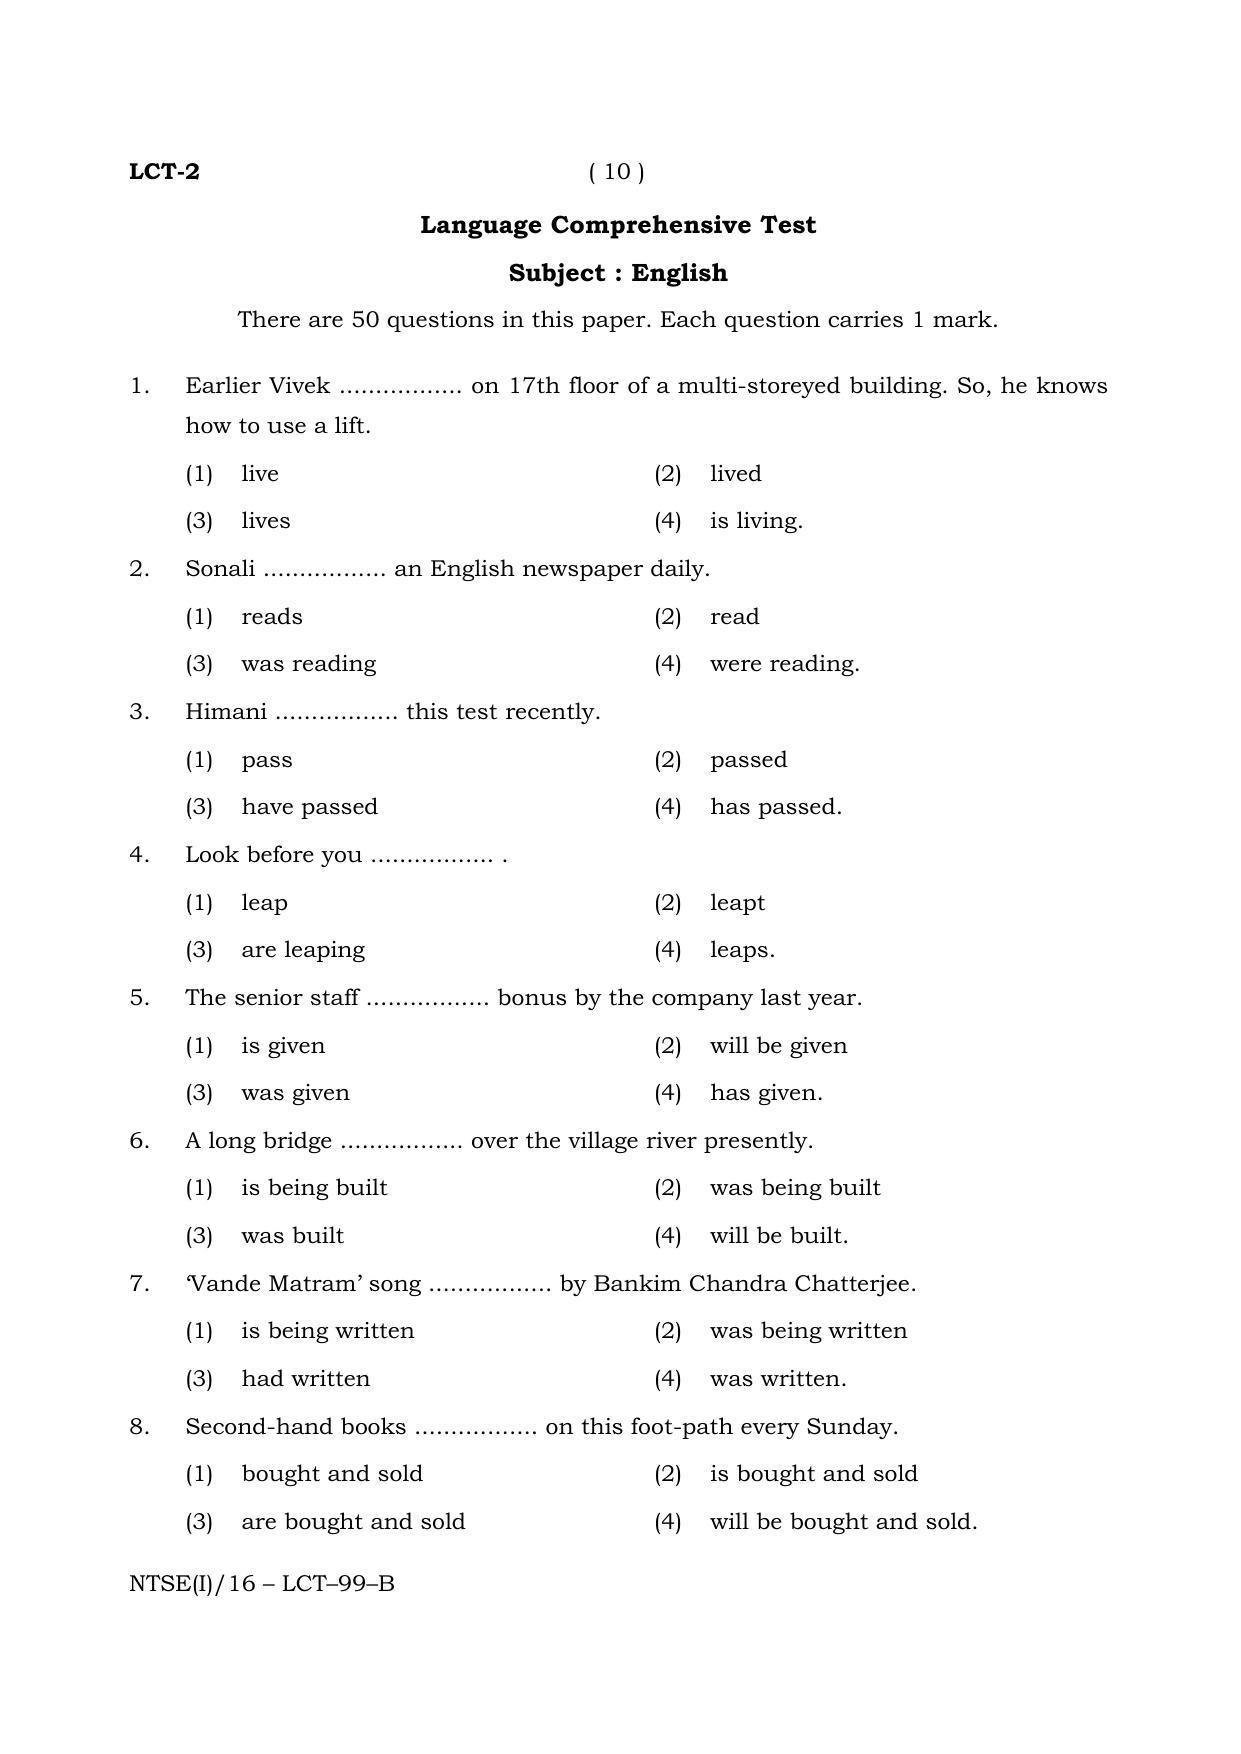 NTSE 2016 (Stage II) LCT Question Paper - Page 10